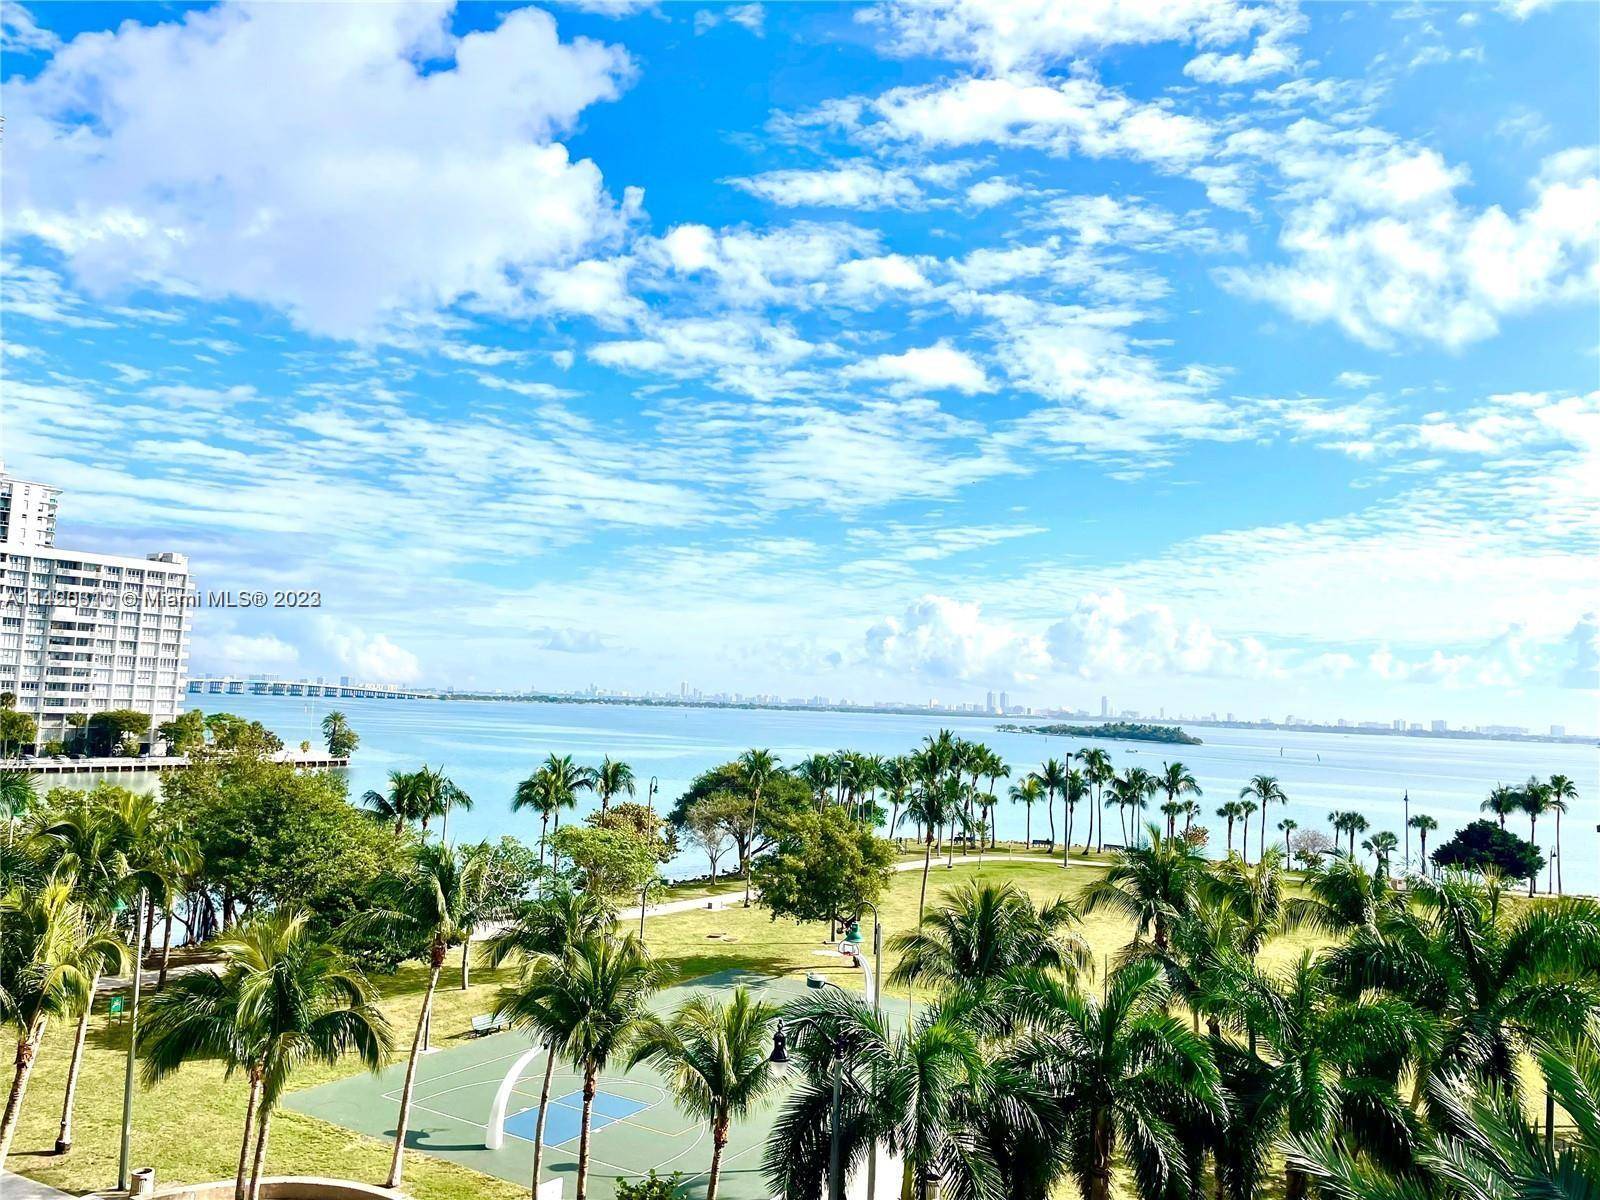 Incredible 1 Bed 1 Bath Loft with 14' ceilings with desirable open floor plan looking over Biscayne Bay and Margaret Pace Park.